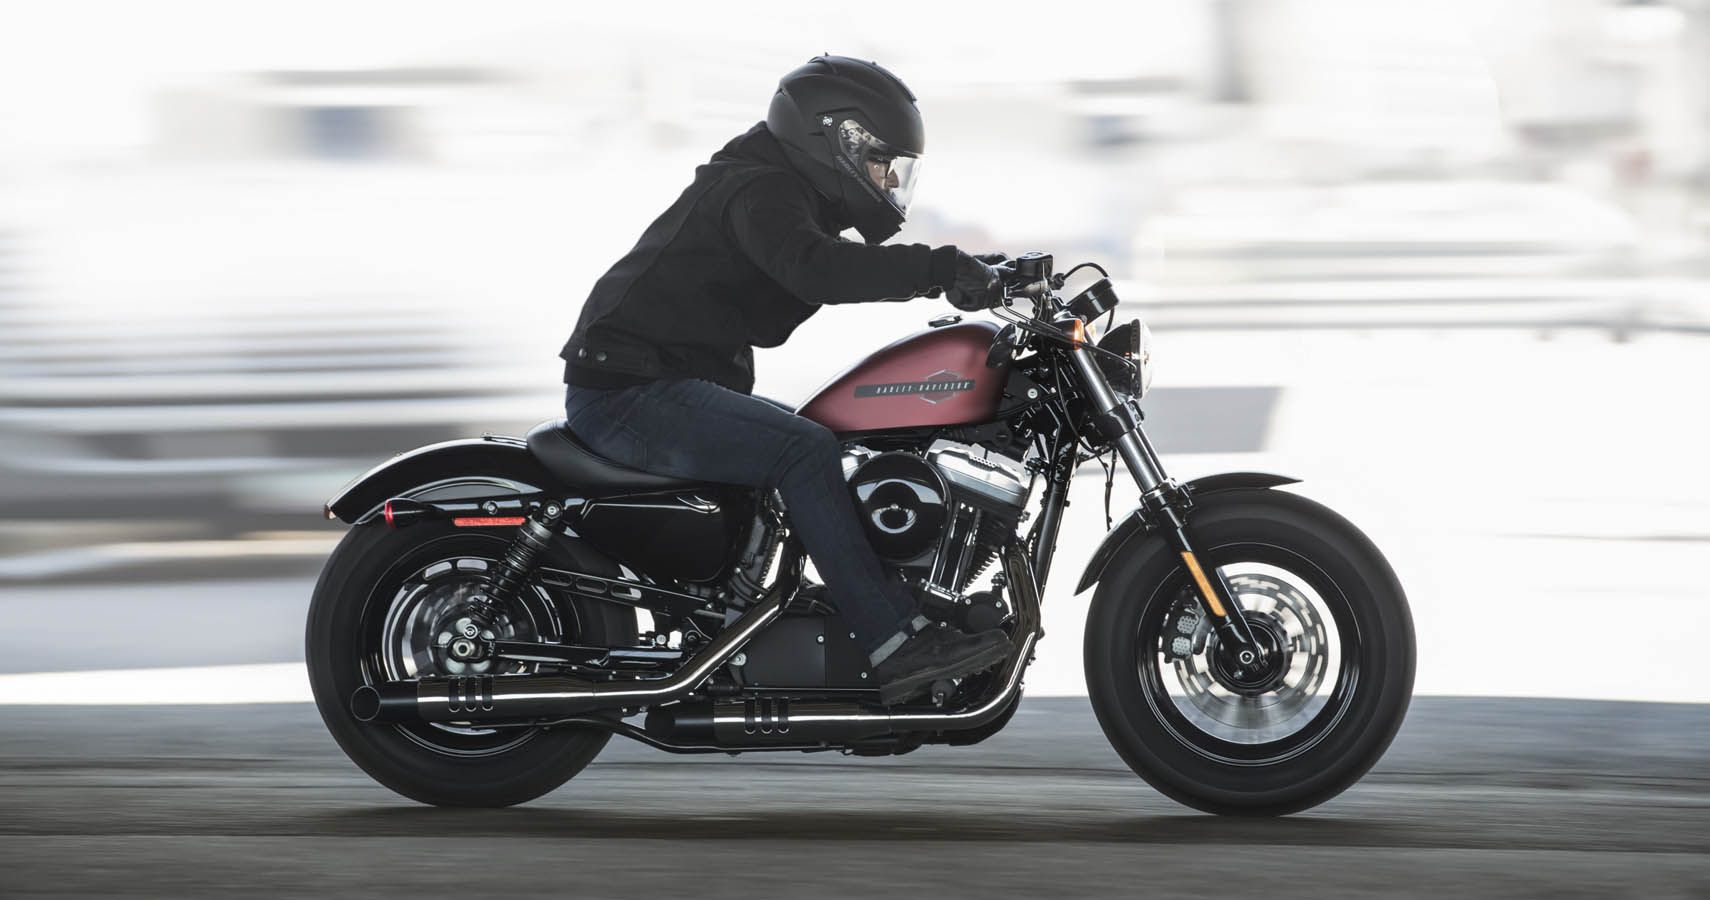 Why The Harley-Davidson Sportster 1200 Is The Perfect Beginner Harley